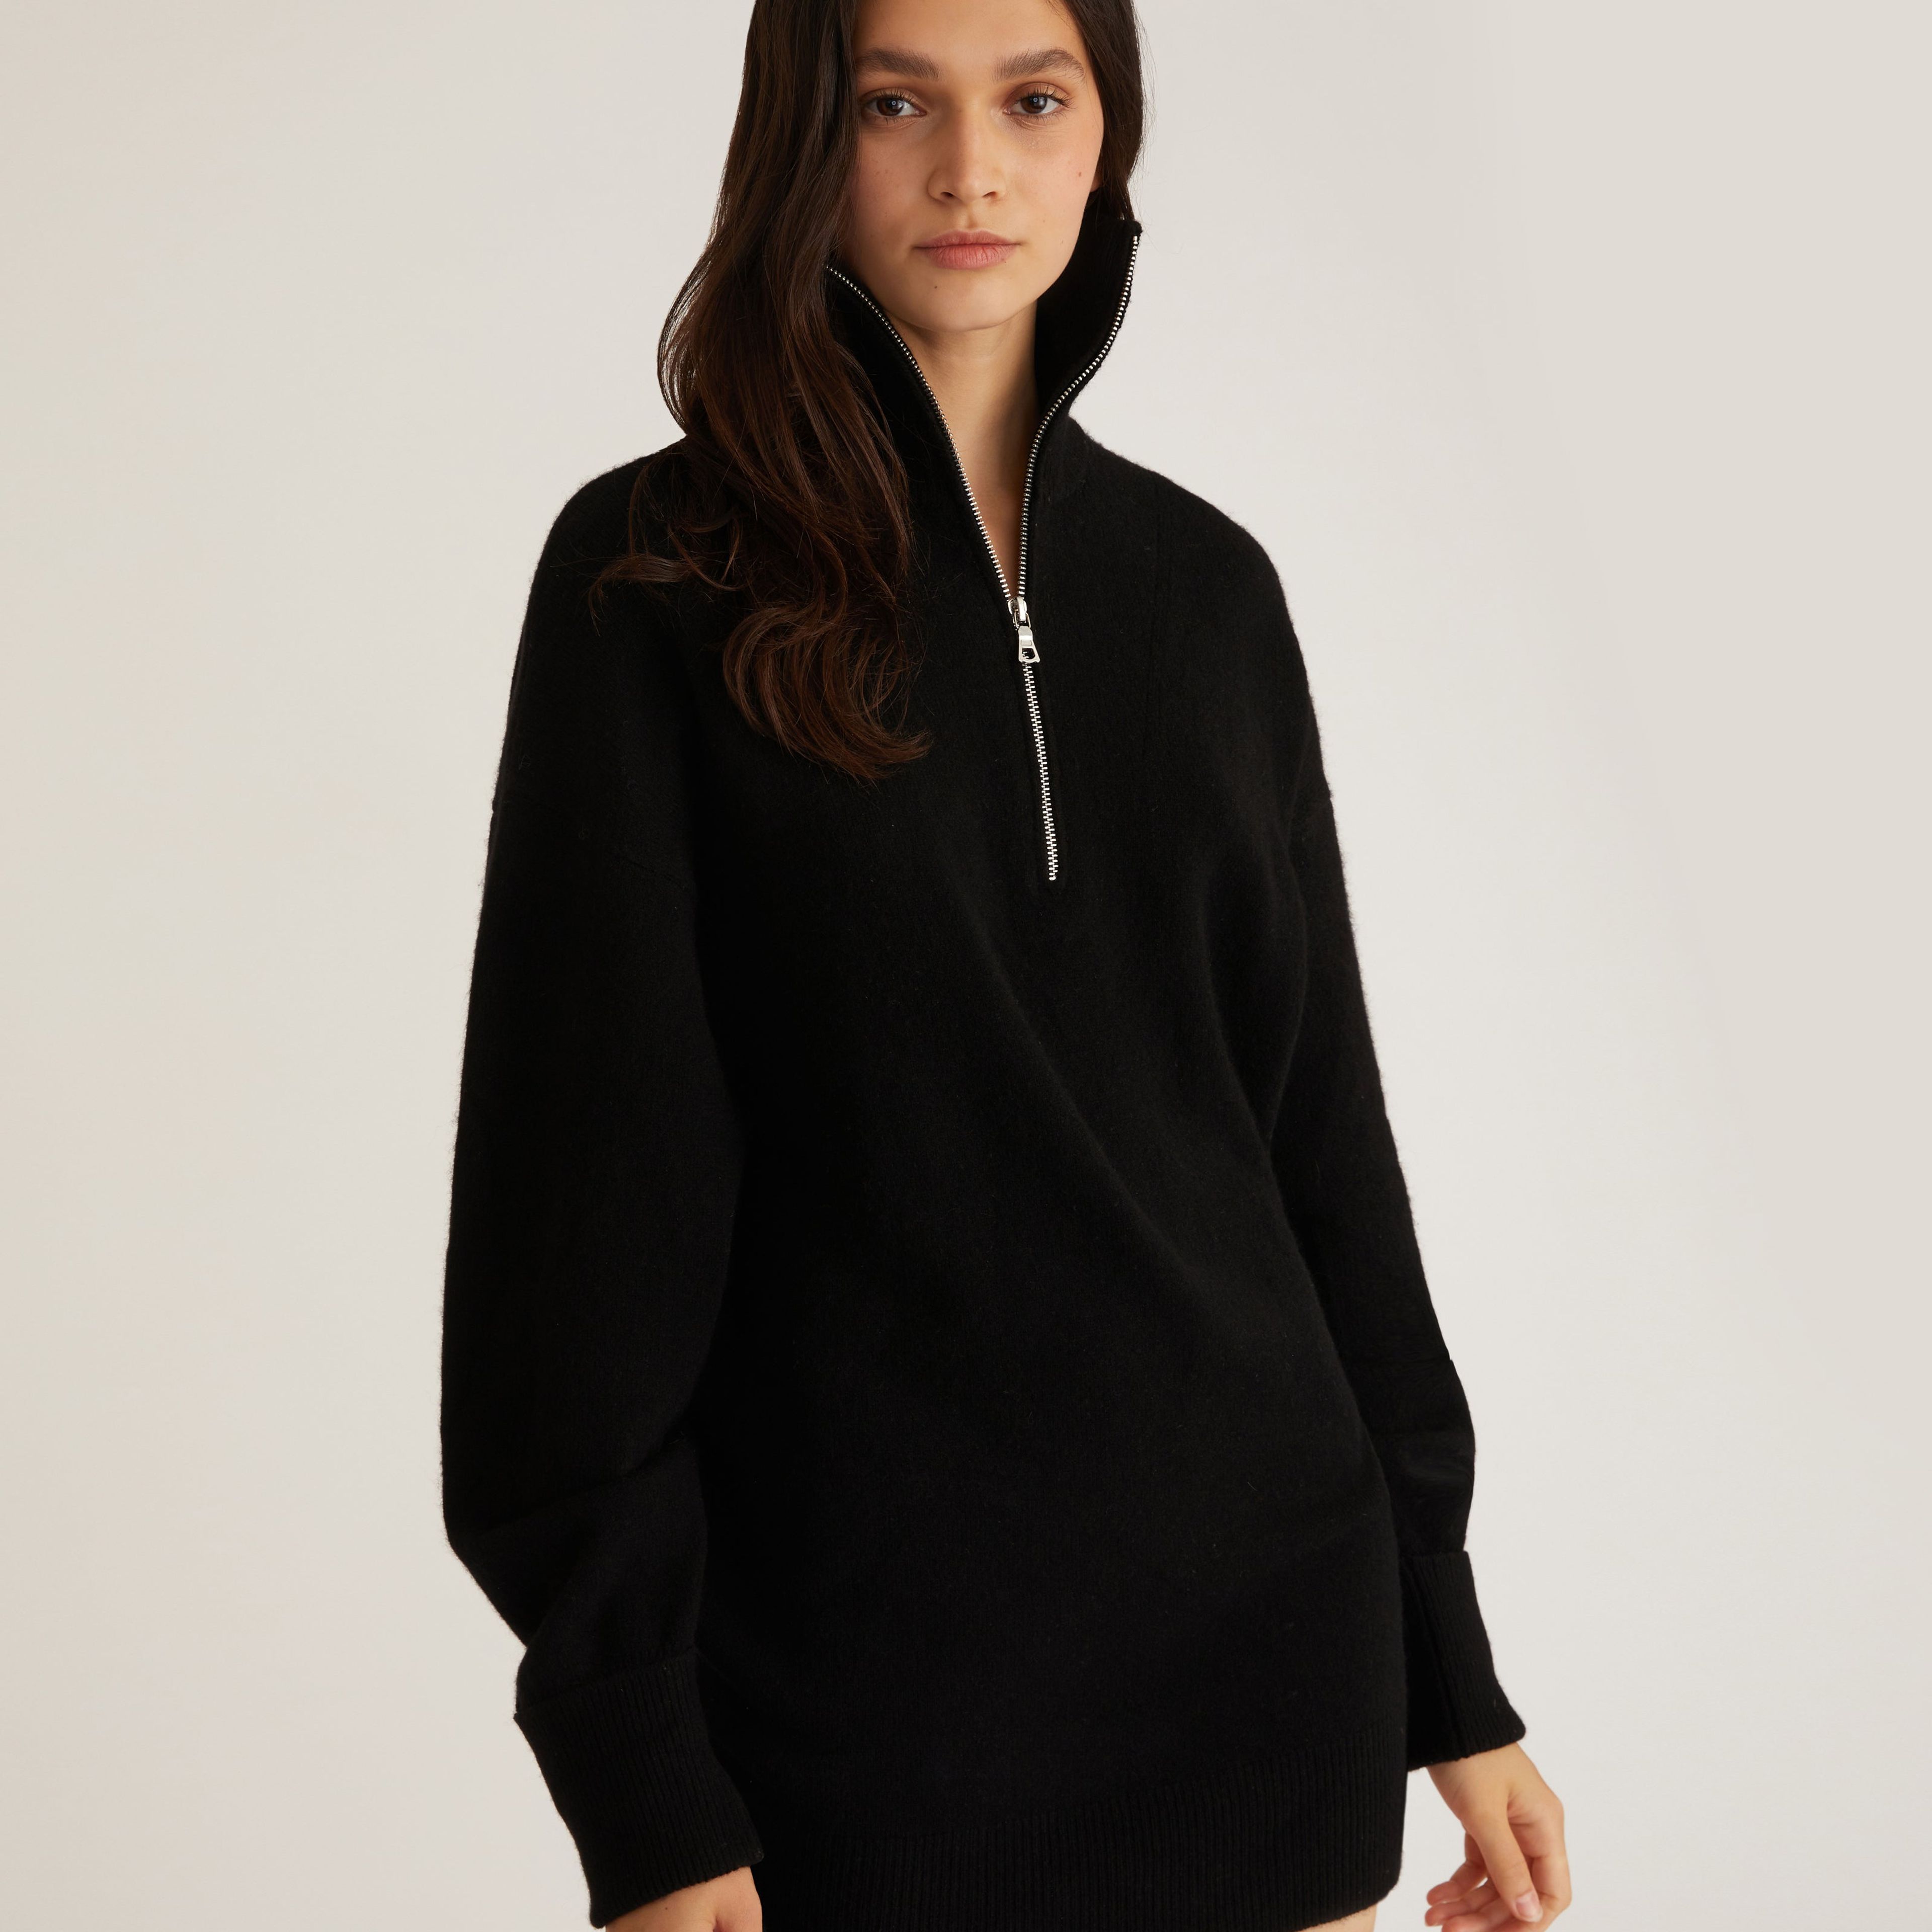 Wesley Slouchy Zip Front Cashmere Blend Sweater Dress in Black